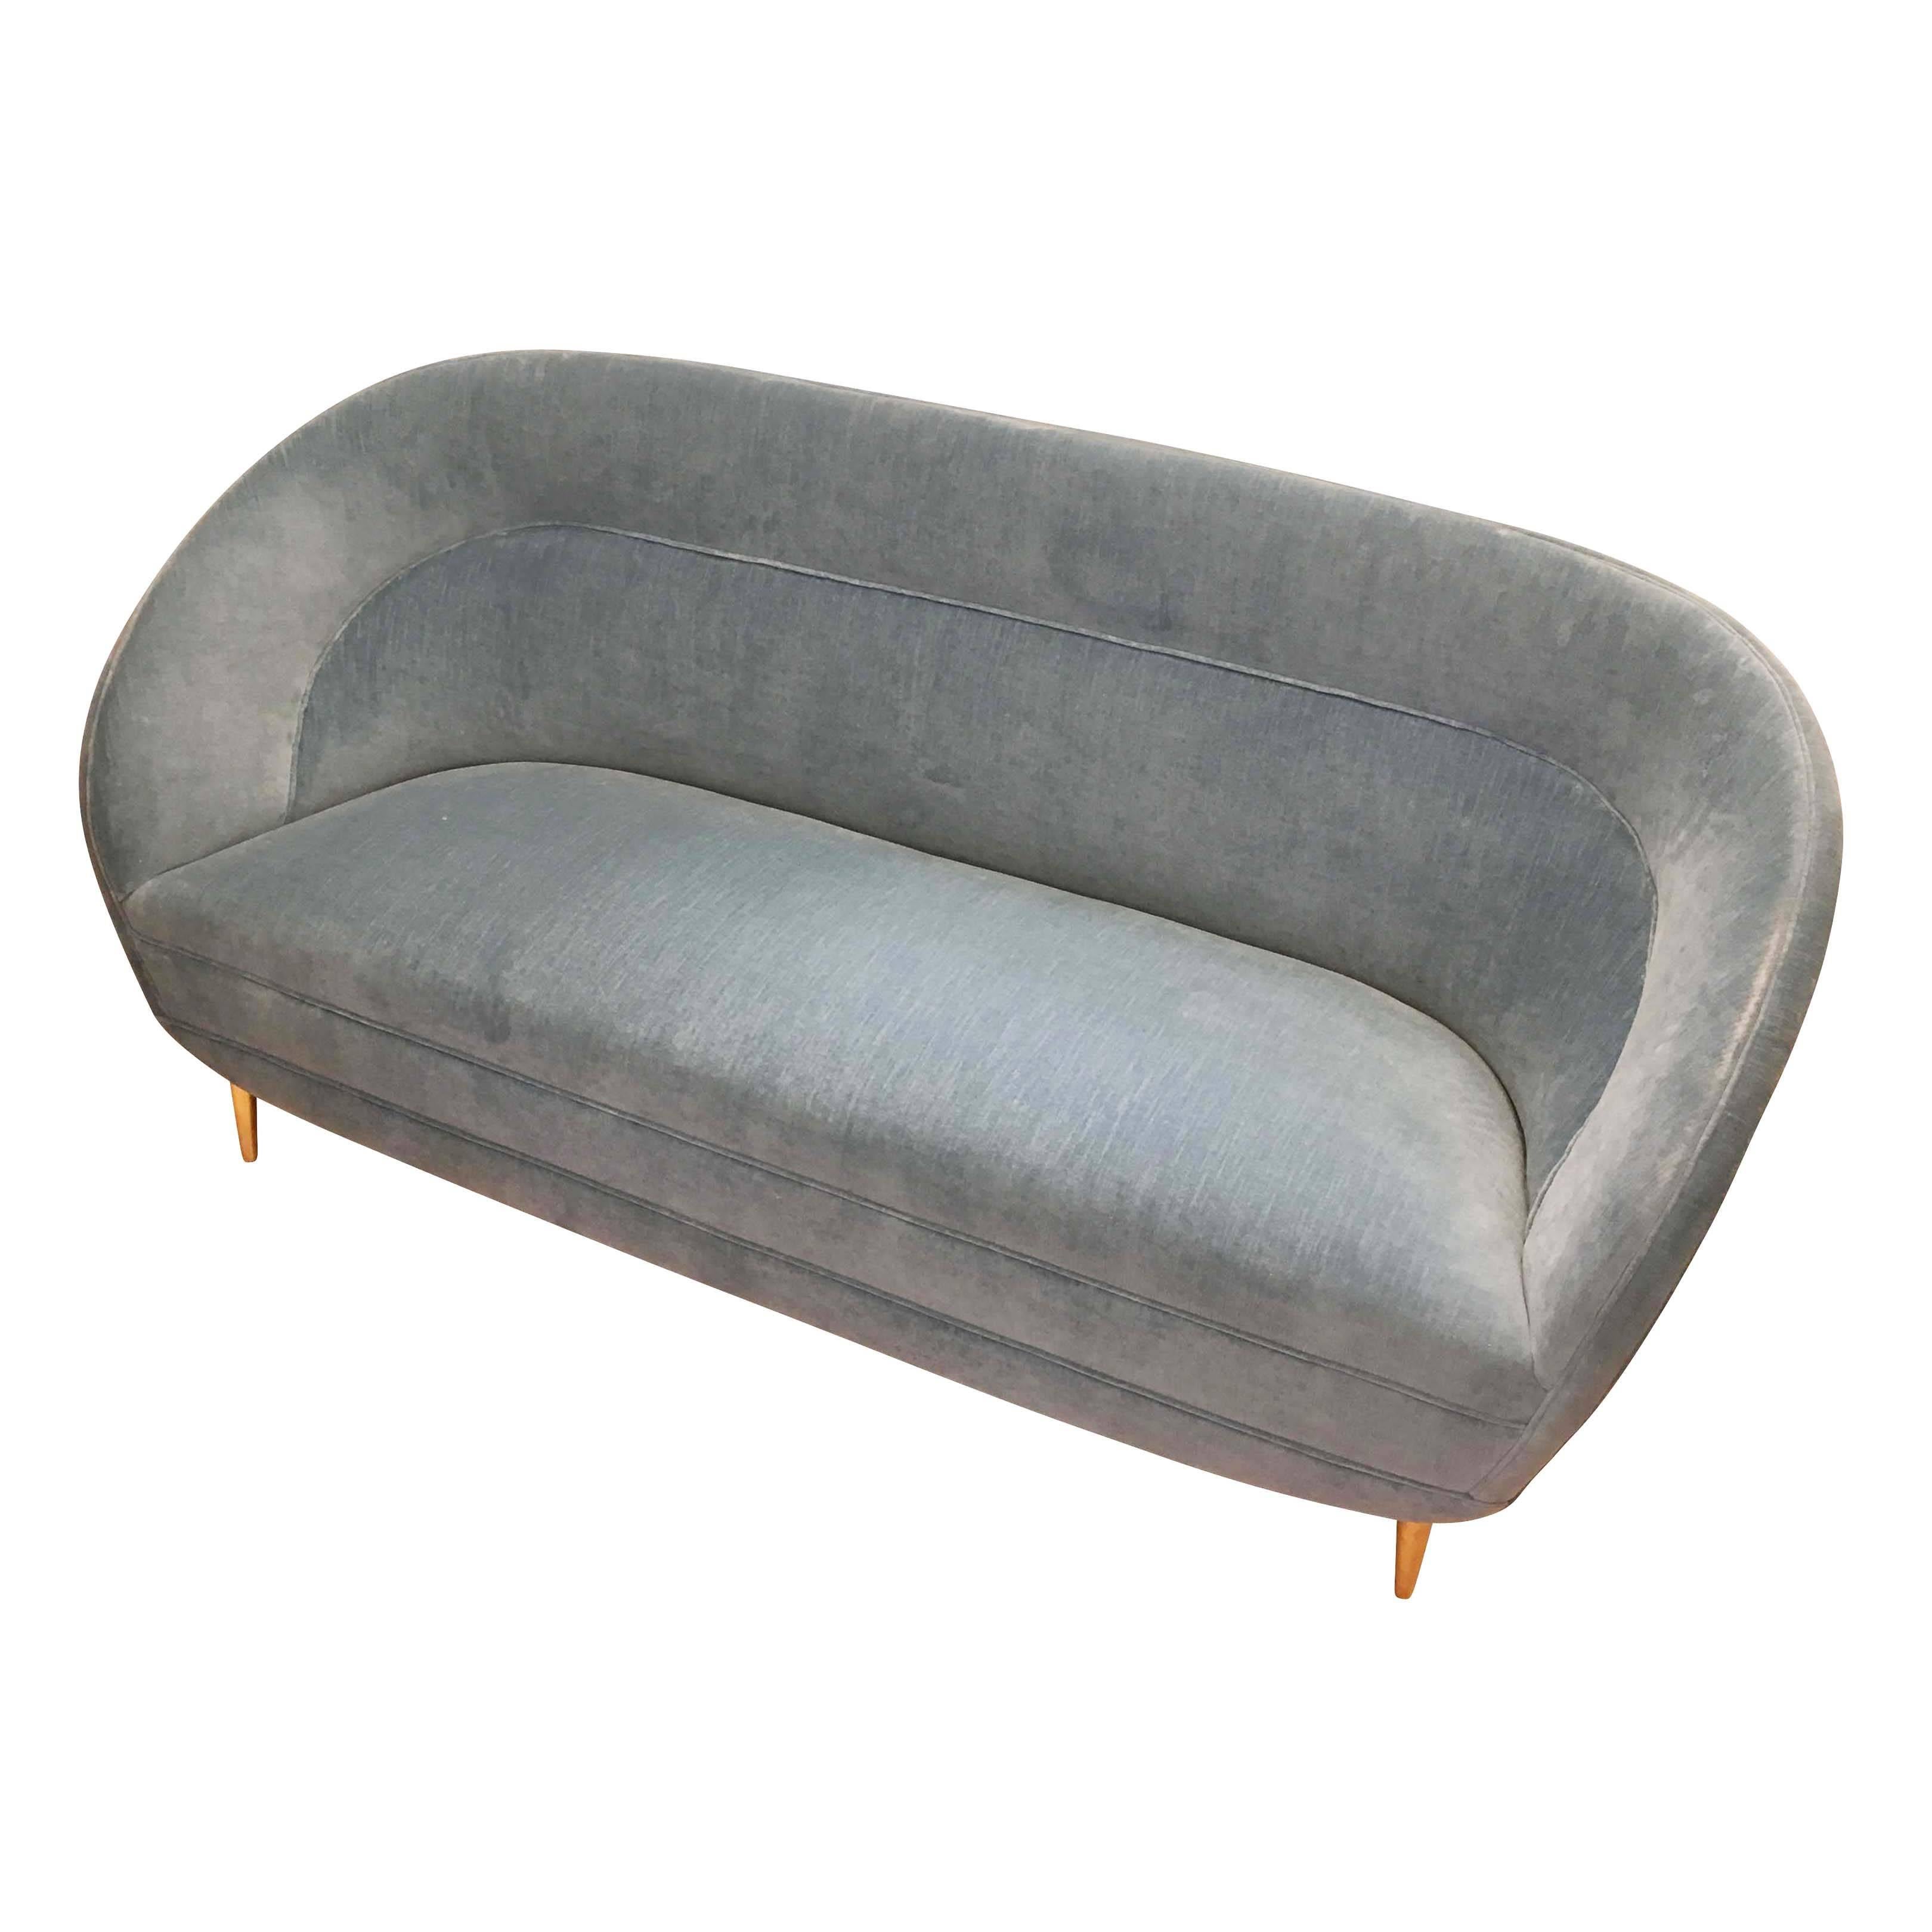 Curvaceous midcentury loveseat by Italian furniture manufacturer ISA. Has been re-upholstered in a blue velvet. The four tapered feet are brass.

Condition: Excellent vintage condition, minor wear consistent with age and use

Measure: Width